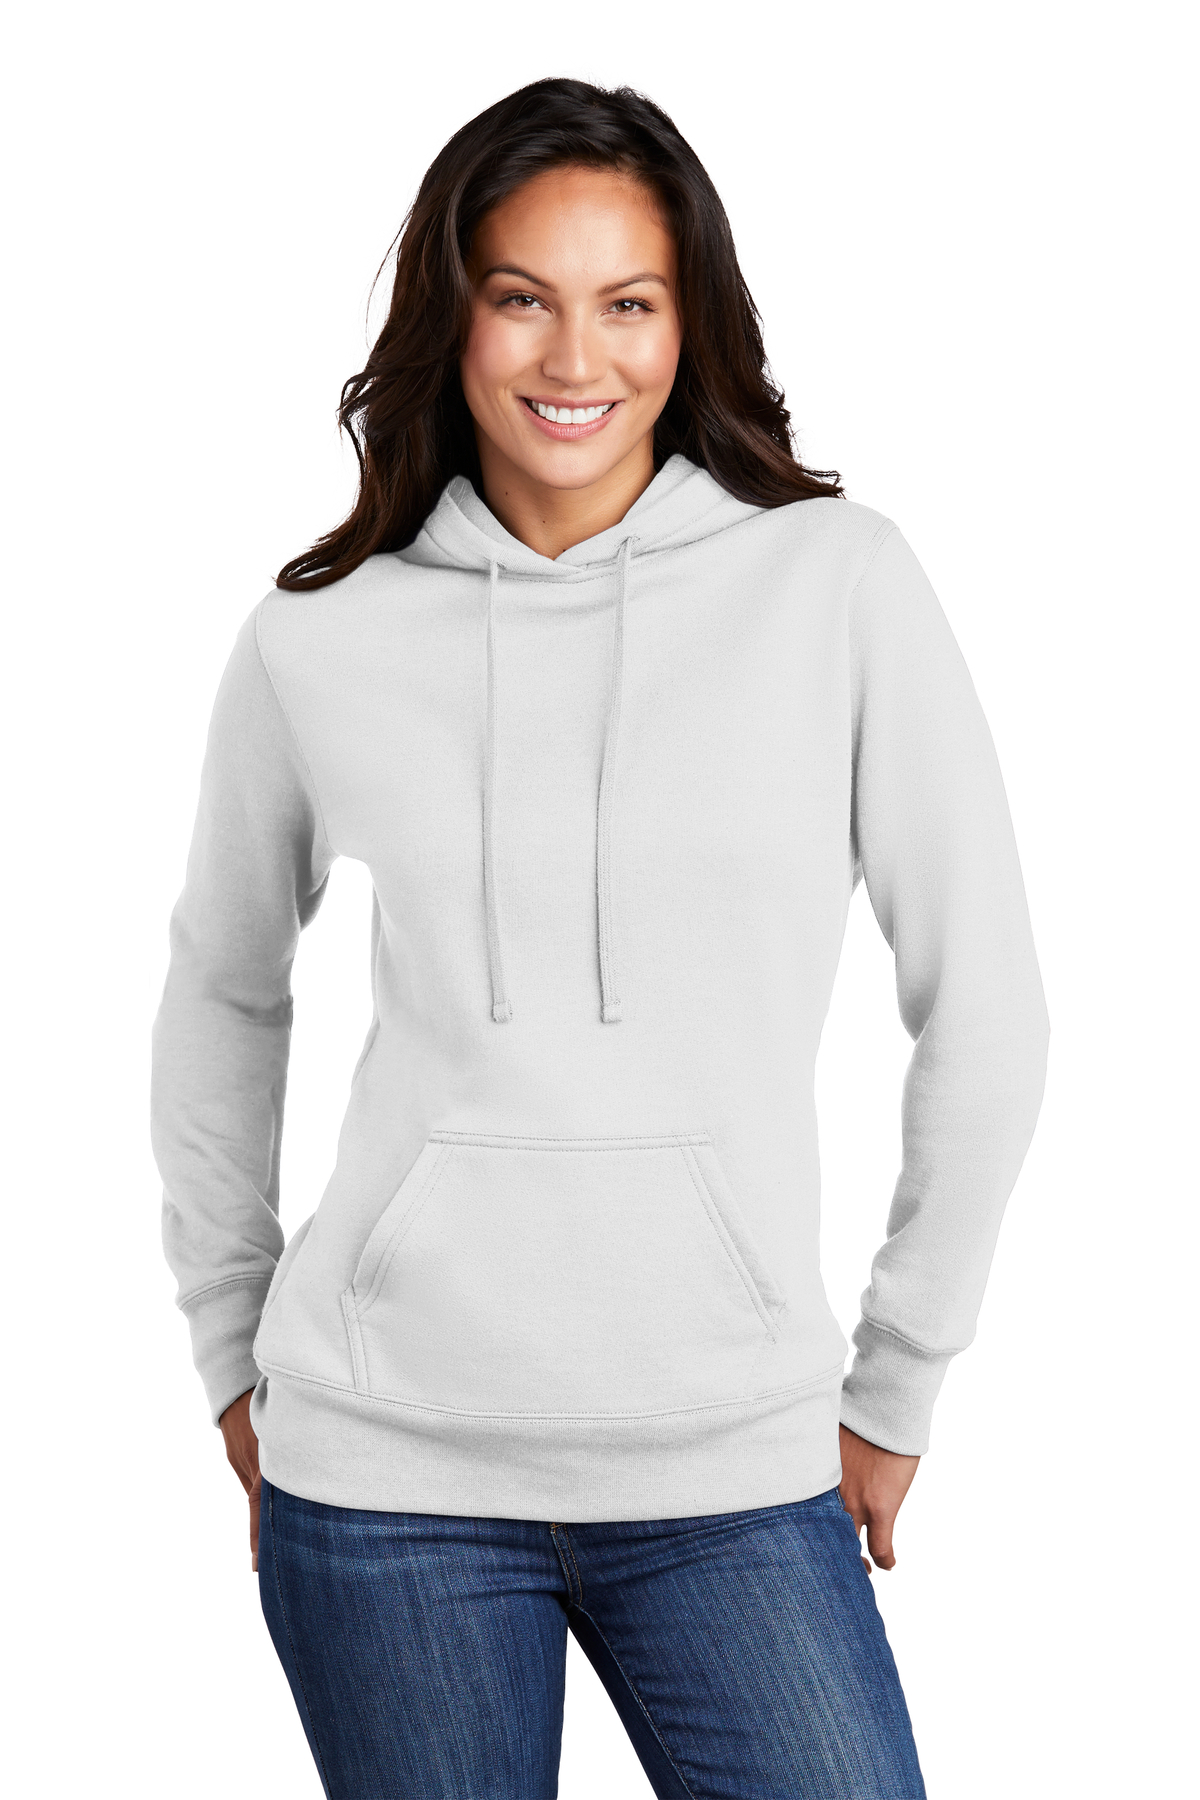 Port And Company Embroidered Womens Core Fleece Pullover Hooded